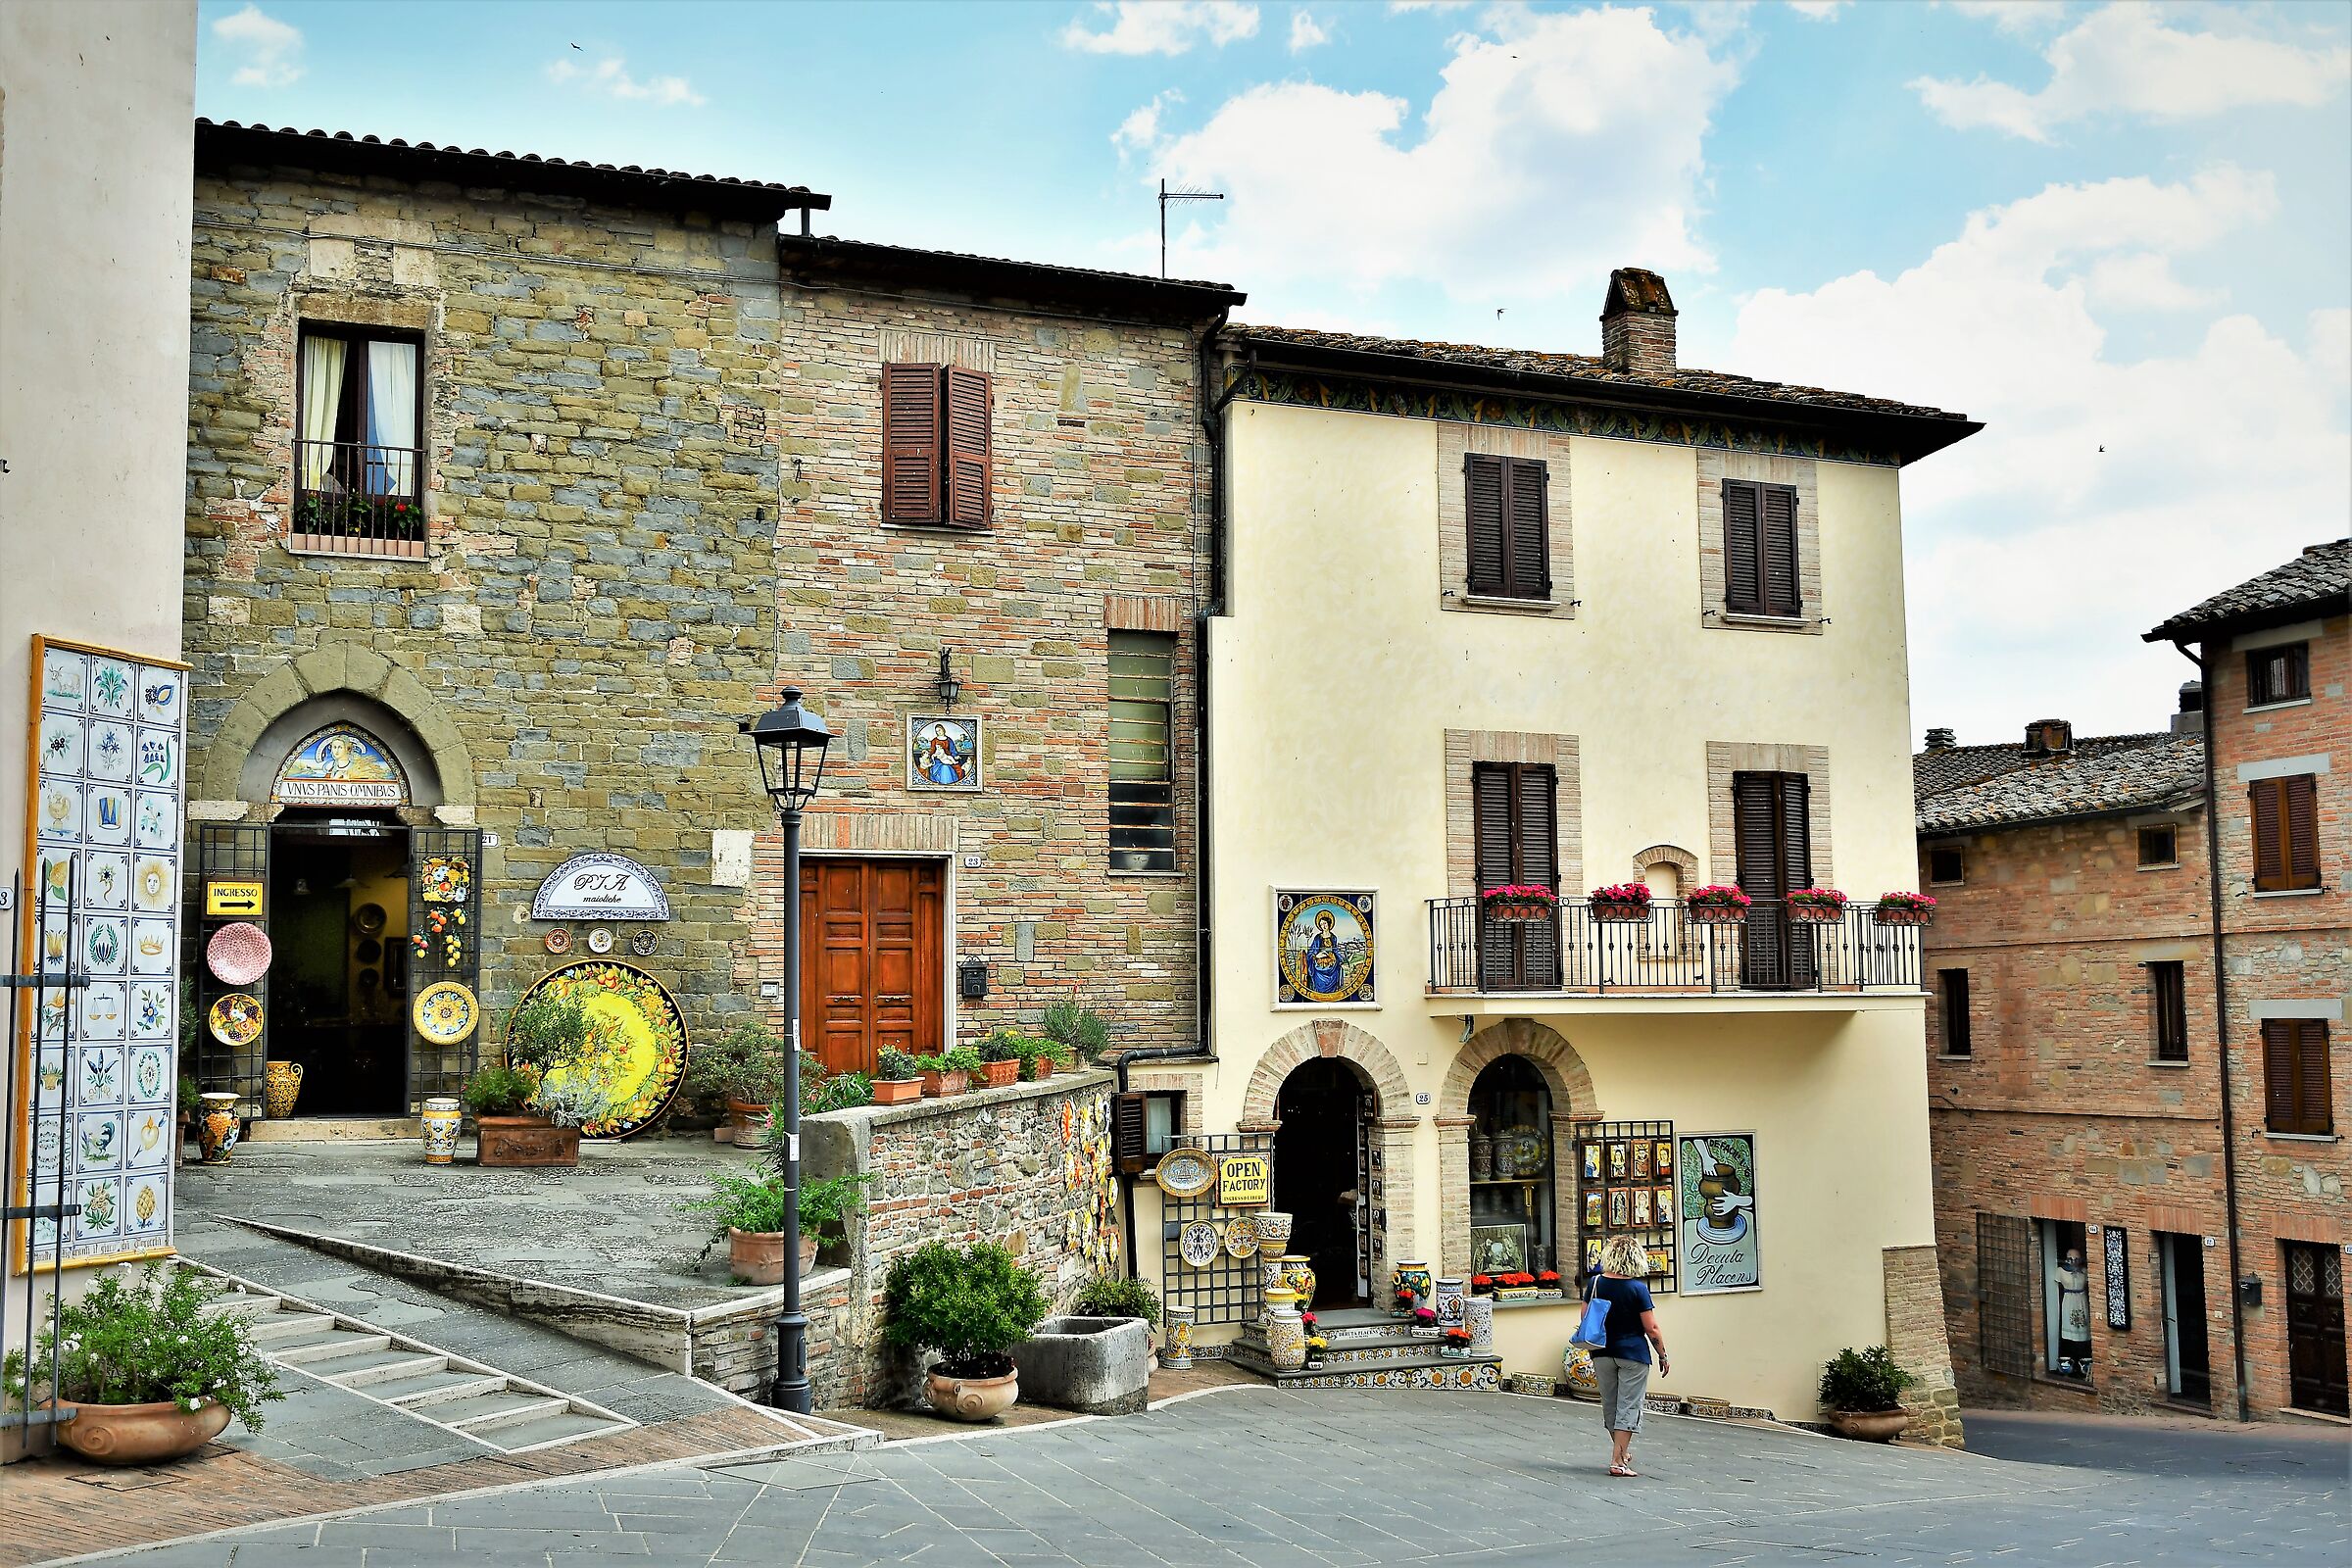 The country of ceramics is robbed in Umbria...